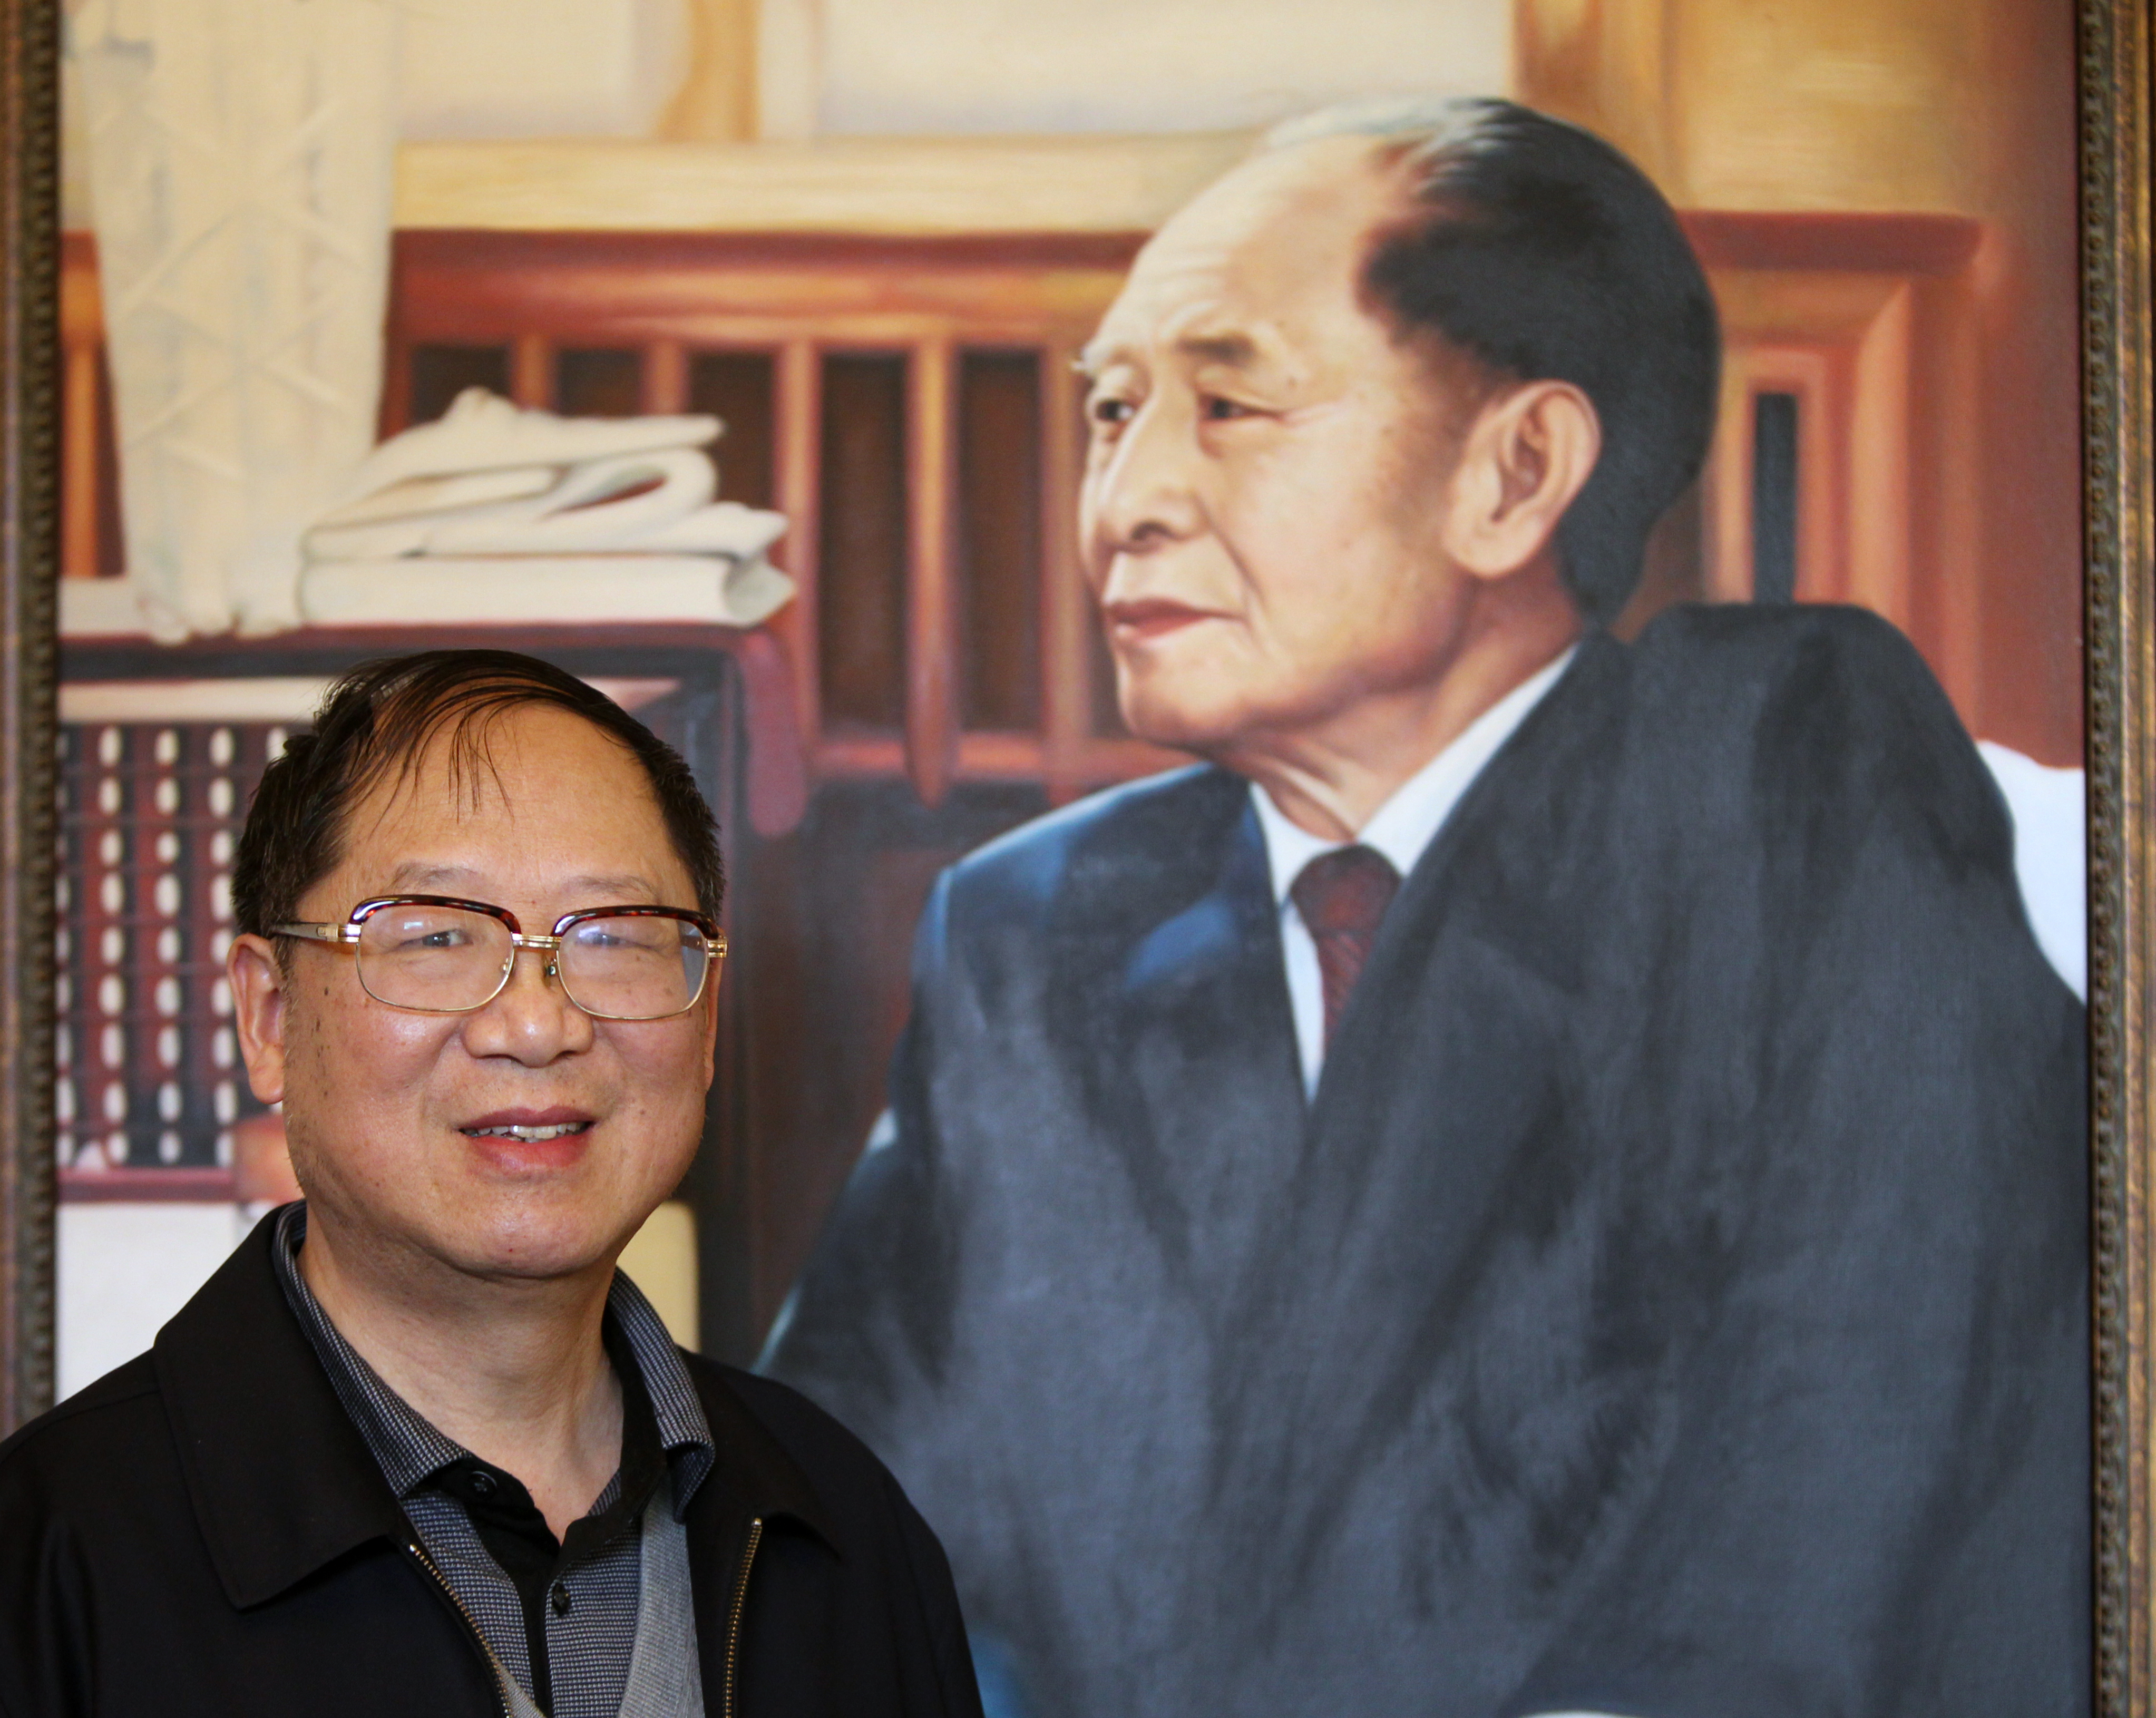 Hu Dehua, youngest son of former general secretary of Communist Party of China Hu Yaobang, poses for a photograph during an interview at home in Beijing. 07APR14 == Photo by Simon Song ==